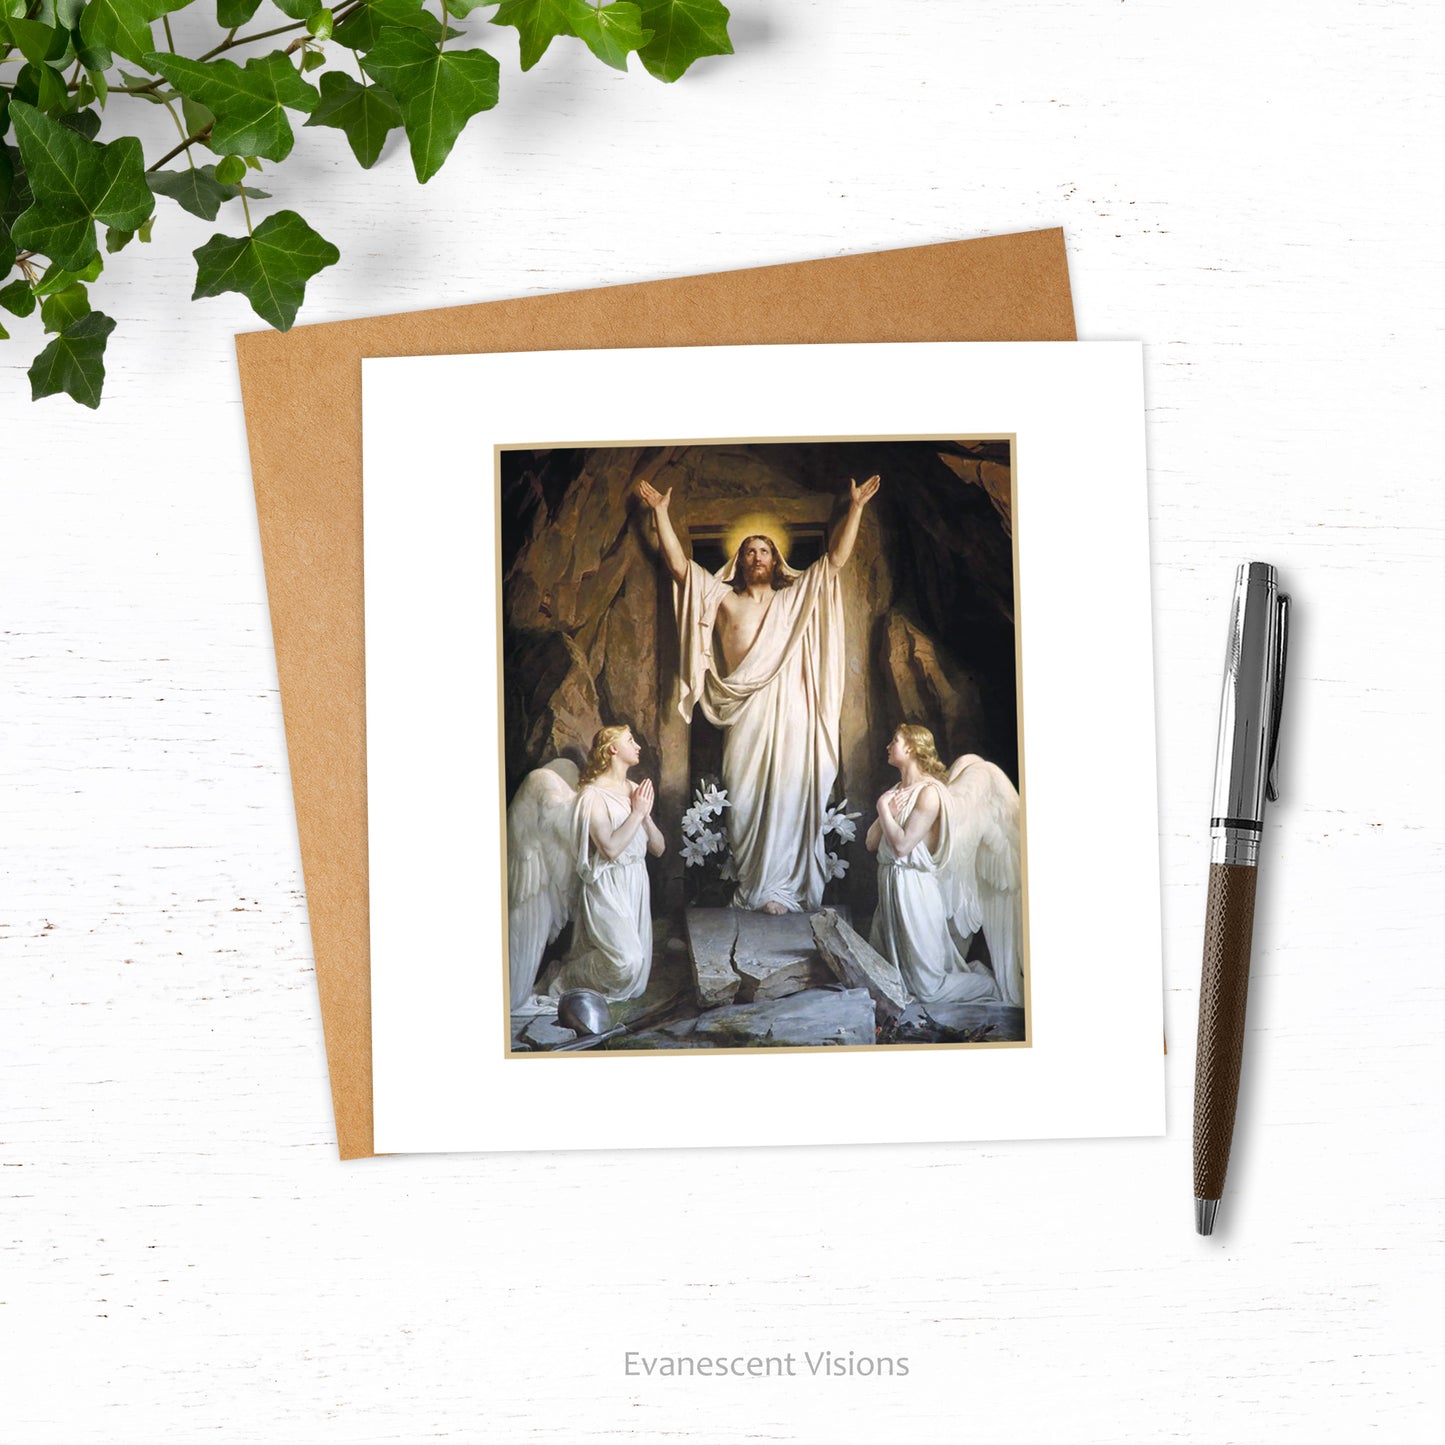 Card and envelope. Card design is Christ and angels from painting by Carl Heinrich Bloch, 'The Resurrection.' Card and envelope are shown on white surface with nearby pen and branch of ivy.